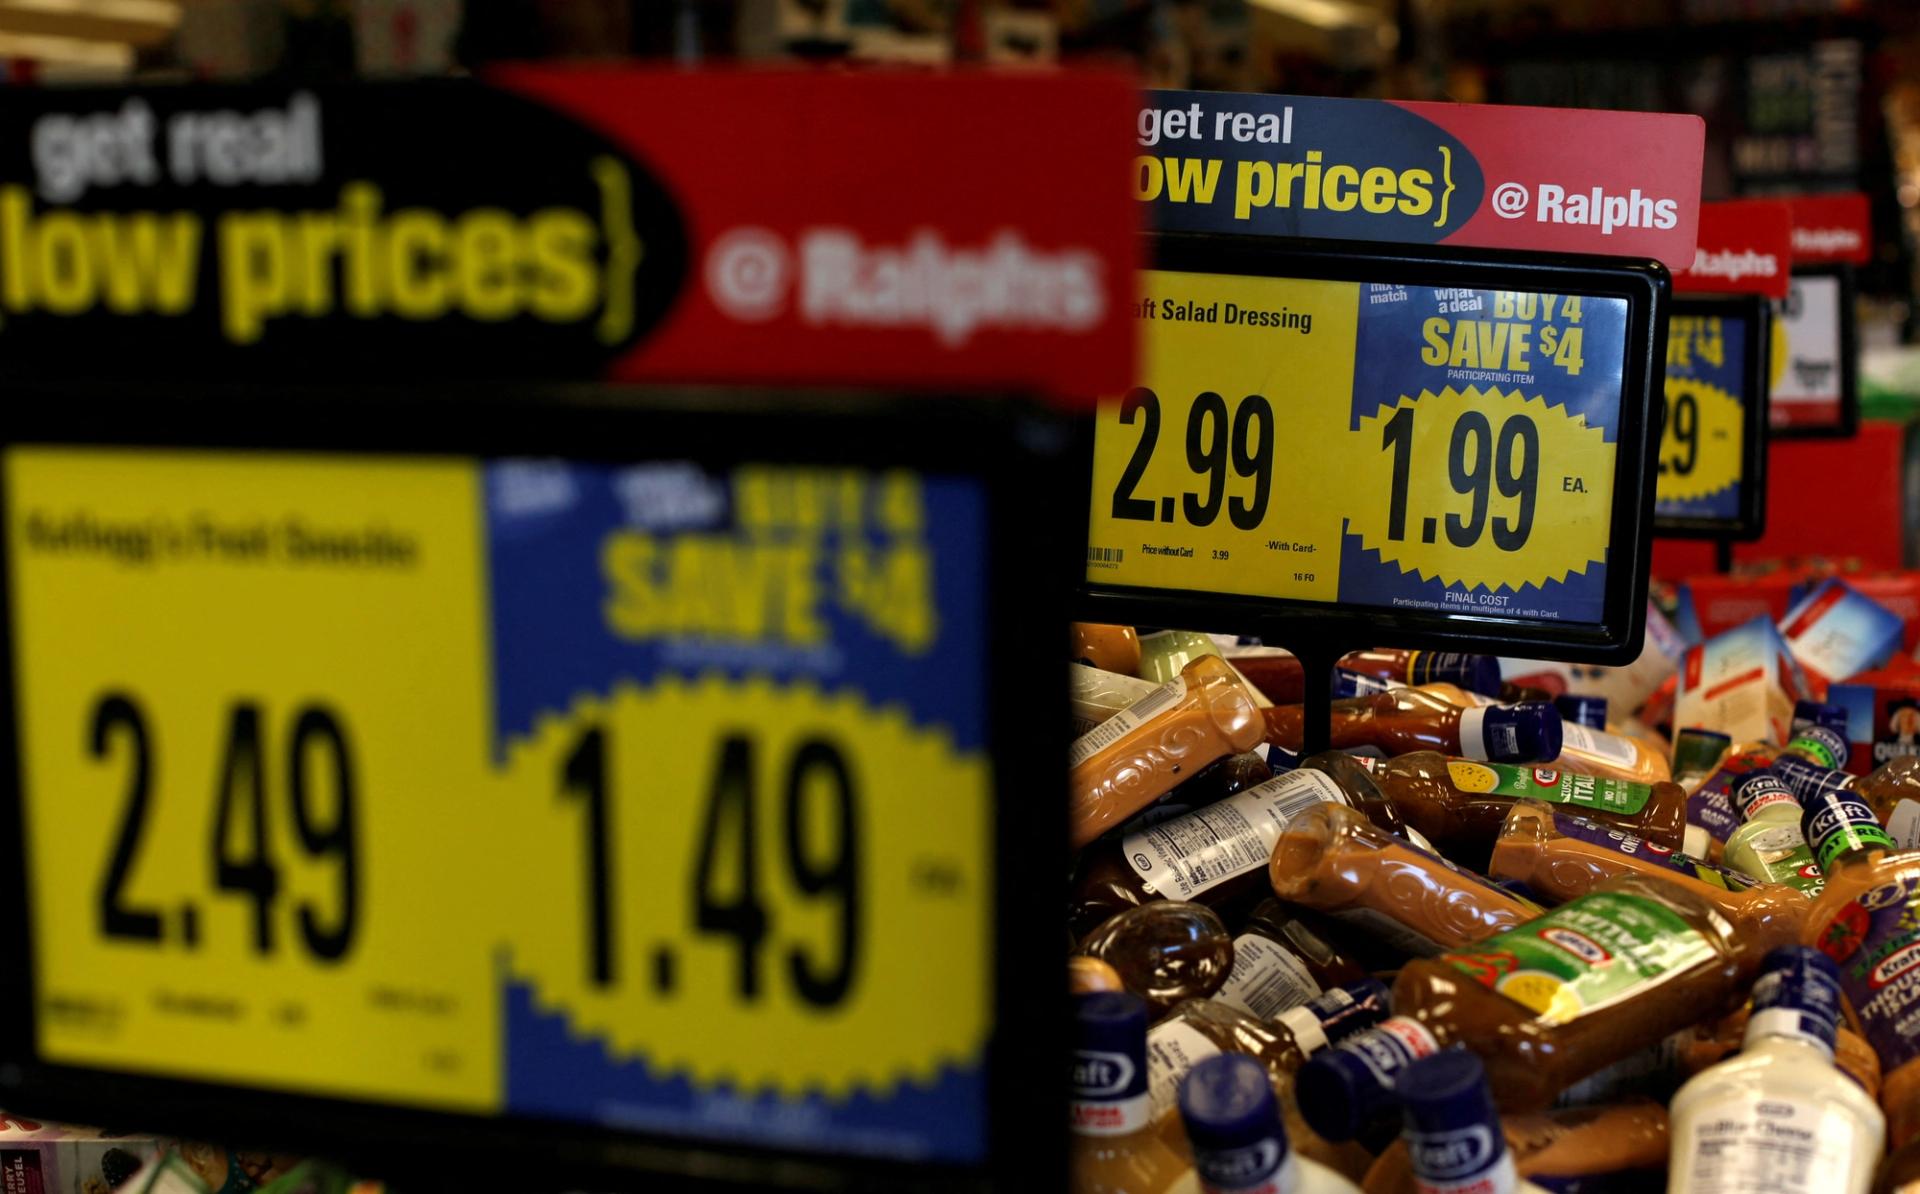 Price tags are pictured at a Ralphs grocery store.